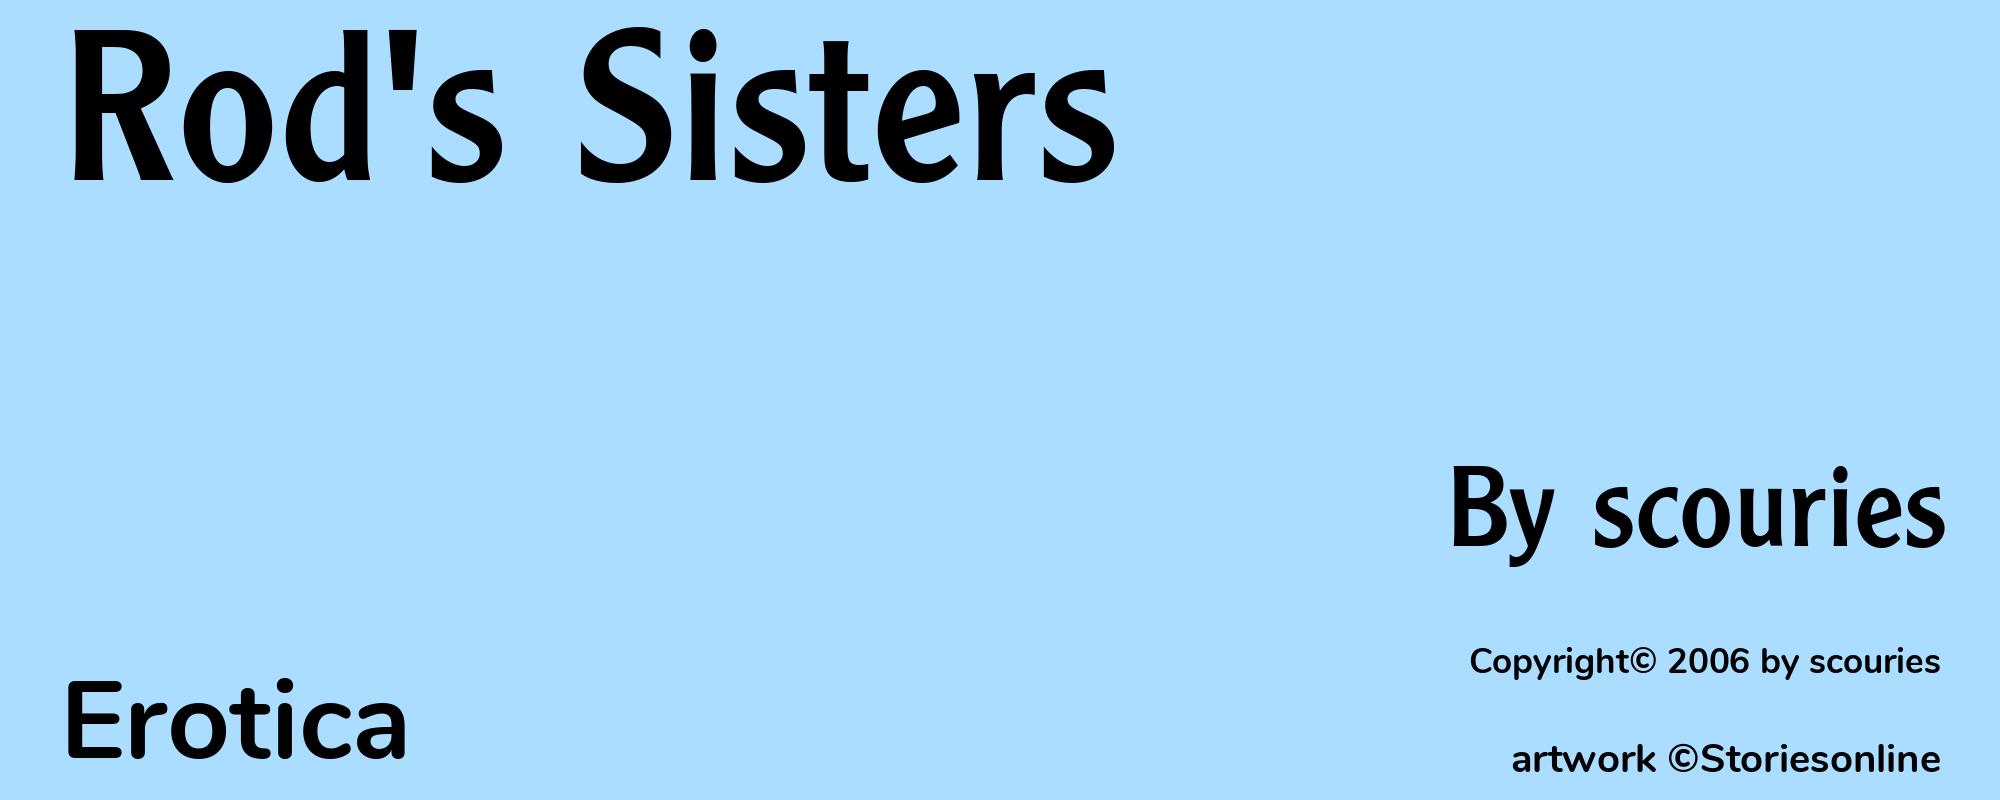 Rod's Sisters - Cover